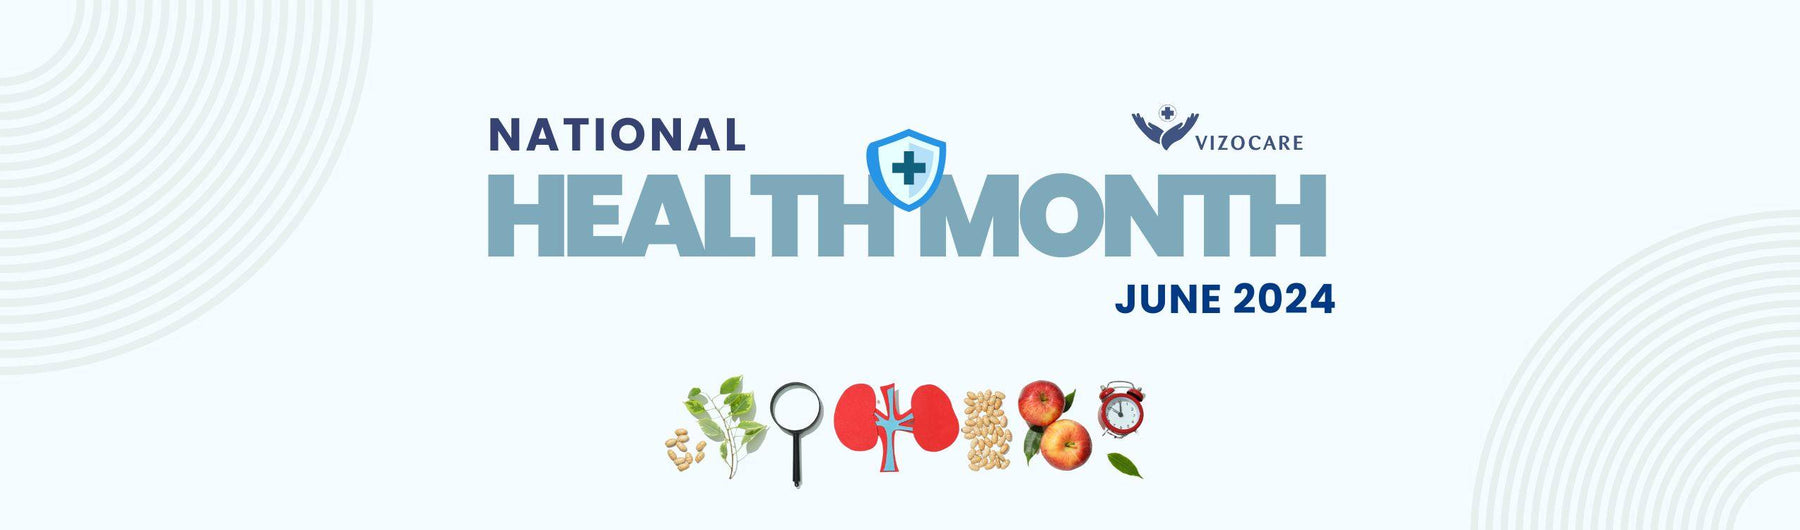 2024 National Health Month: Prioritize Your Wellbeing - VizoCare